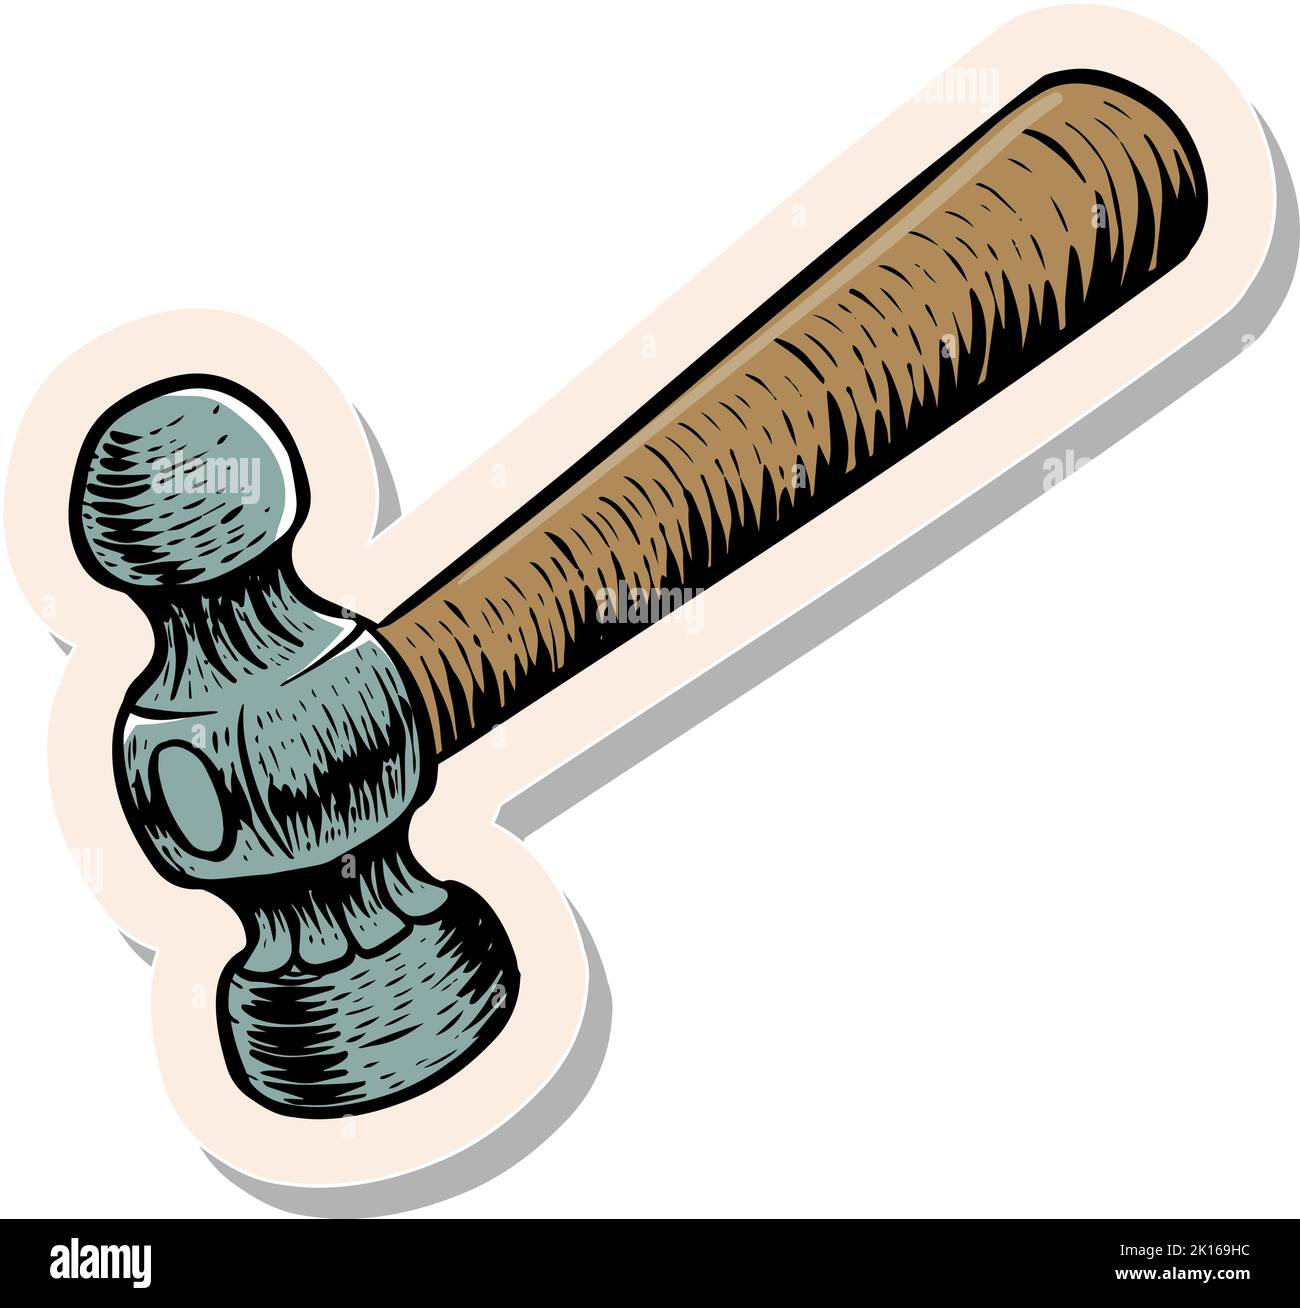 how to draw ball peen hammer/mallet hammer drawing 